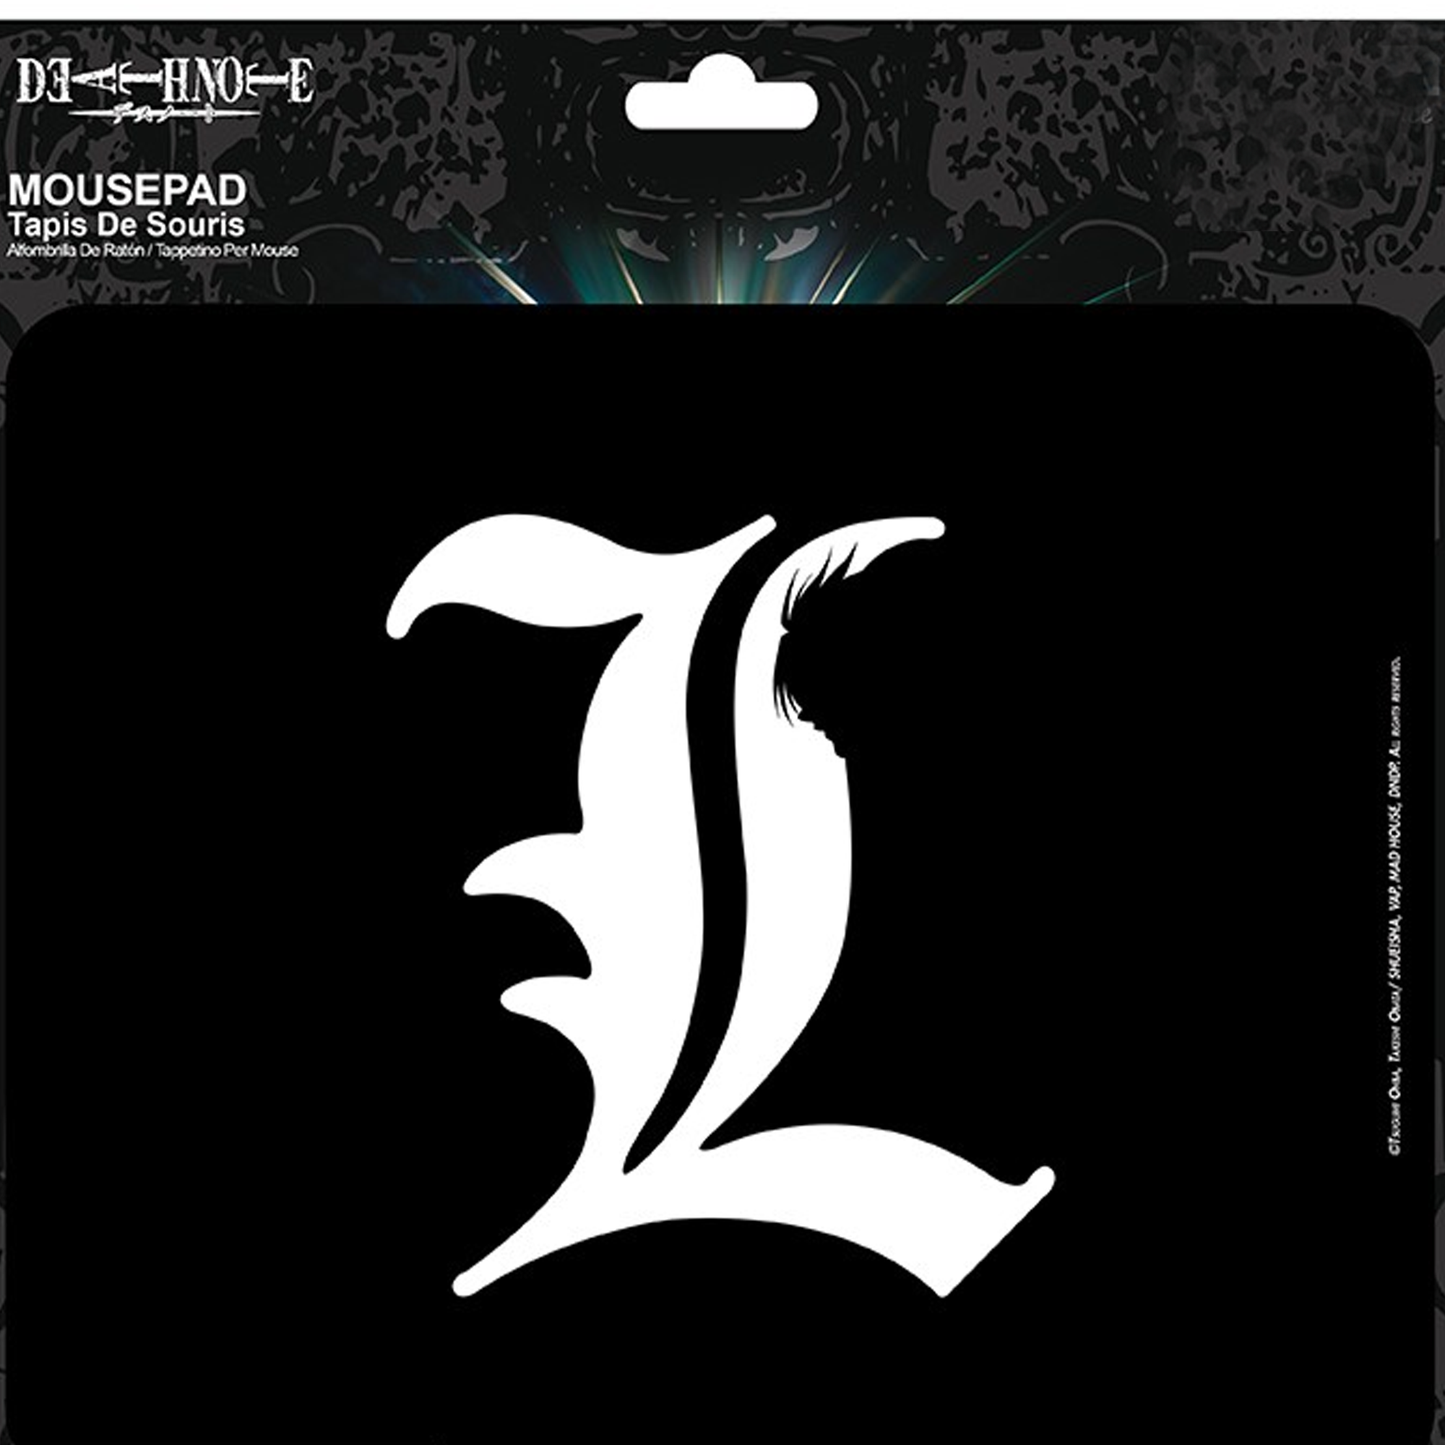 Death Note 'L' Mouse Pad - Flexible Computer Mouse Mat in Packaging | Happy Piranha